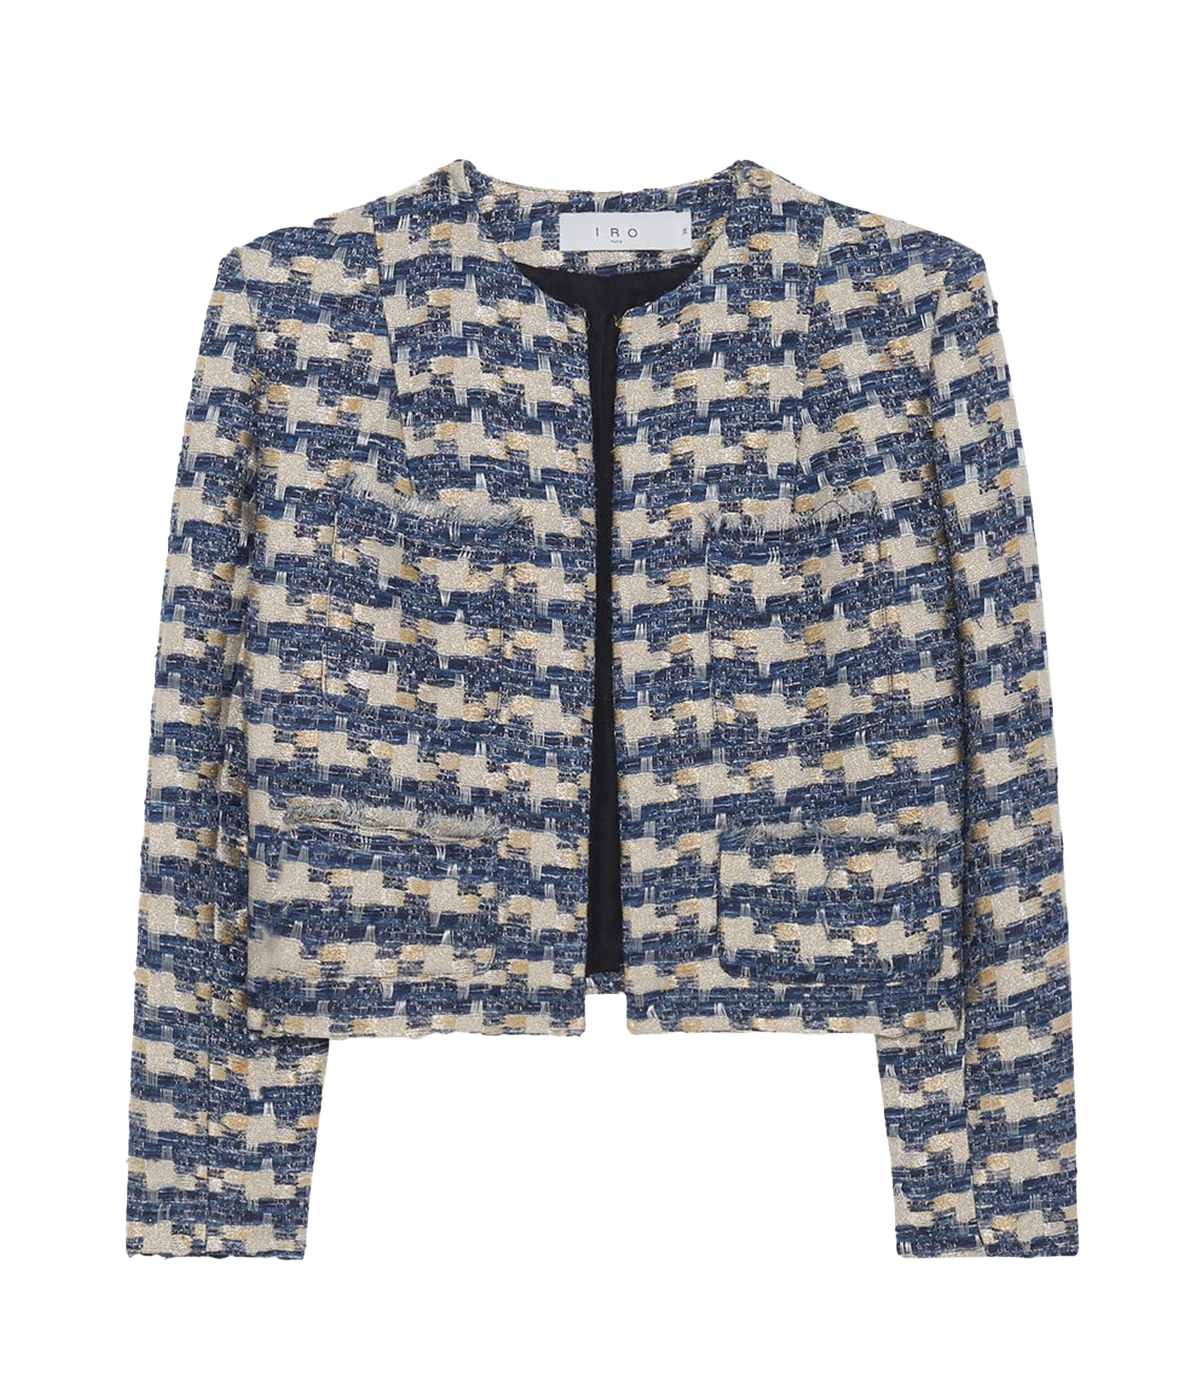 A cropped tween blue and gold houndstooth jacket with a round neck and straight cut. Fringed front pockets add a subtle cool touch. 